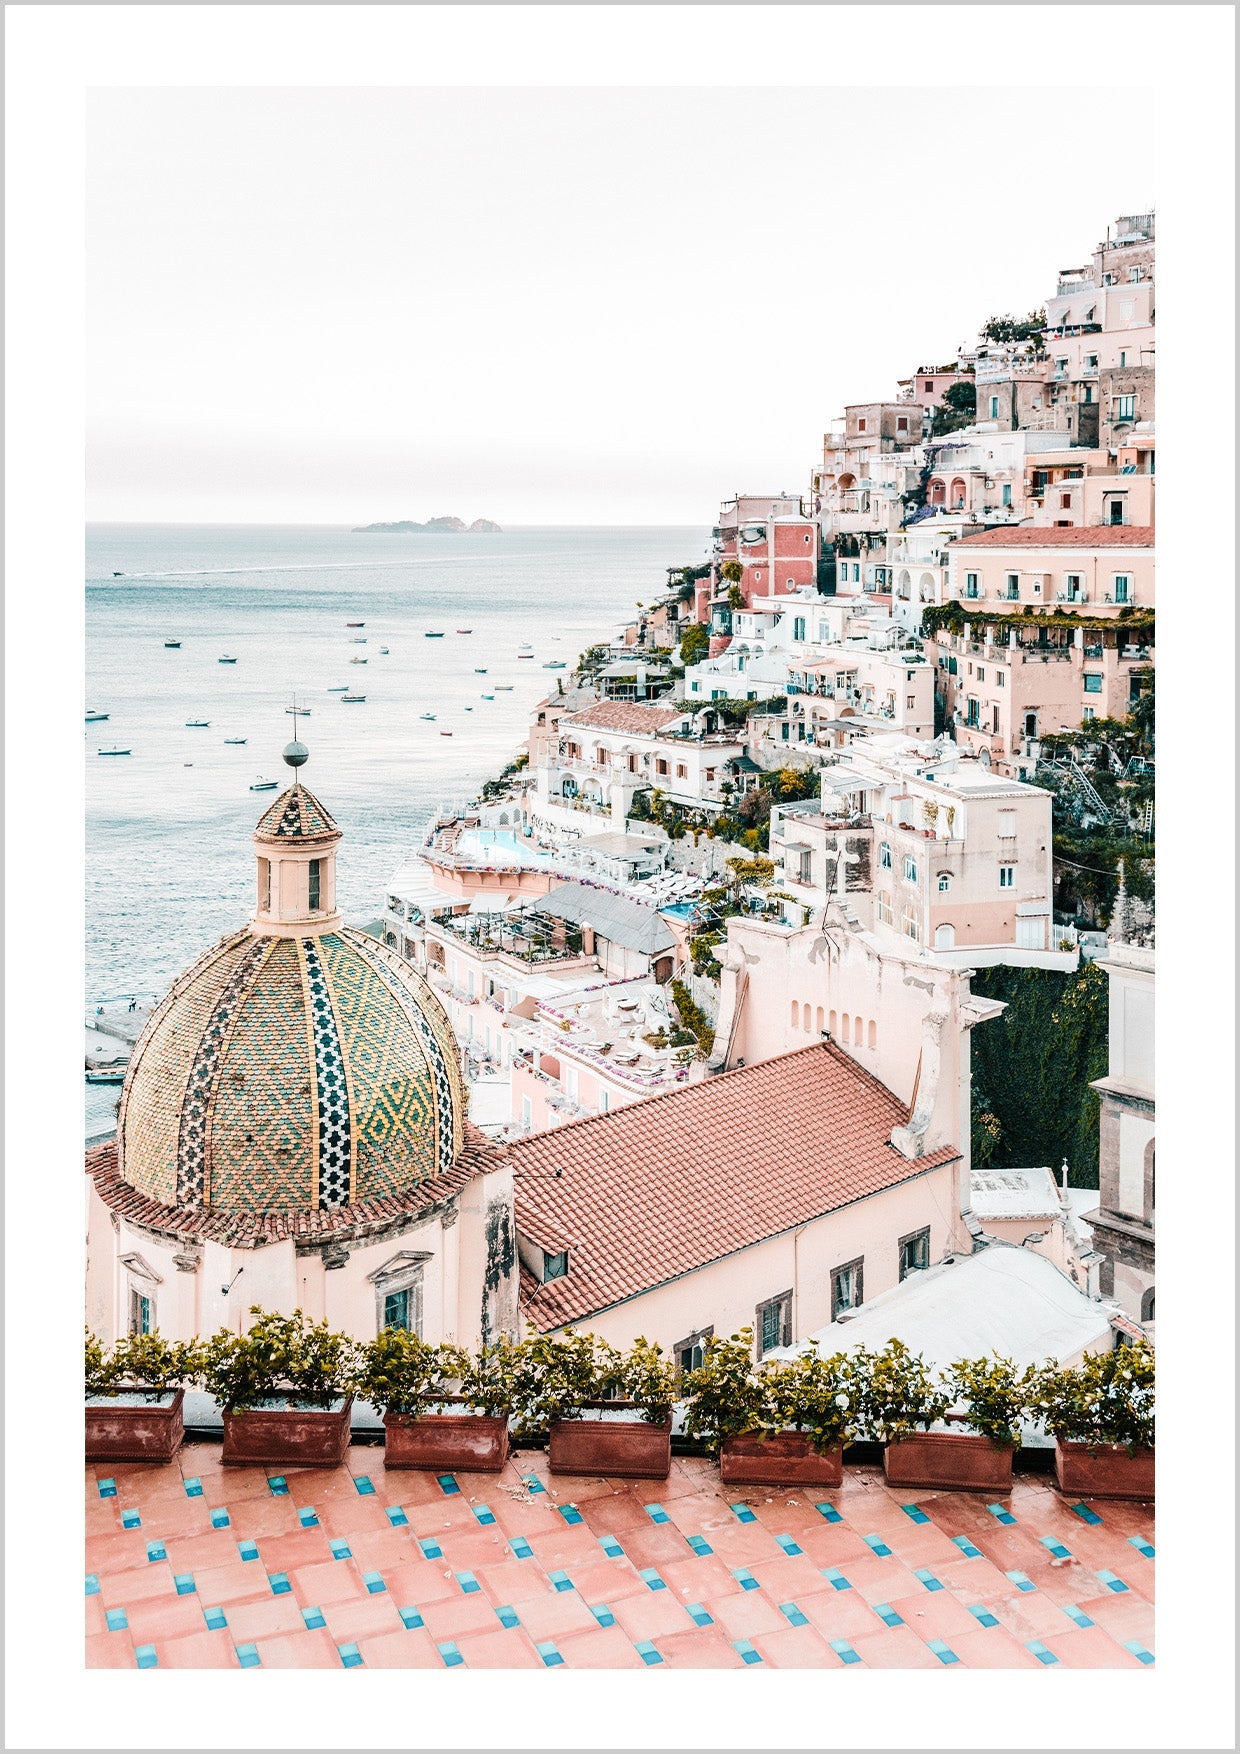 photography from the village of Positano on the Amalfi Coast in the province of Salerno in Kampien, south of Naples in Italy. The village is beautifully situated on a hillside with beautiful buildings and architecture.